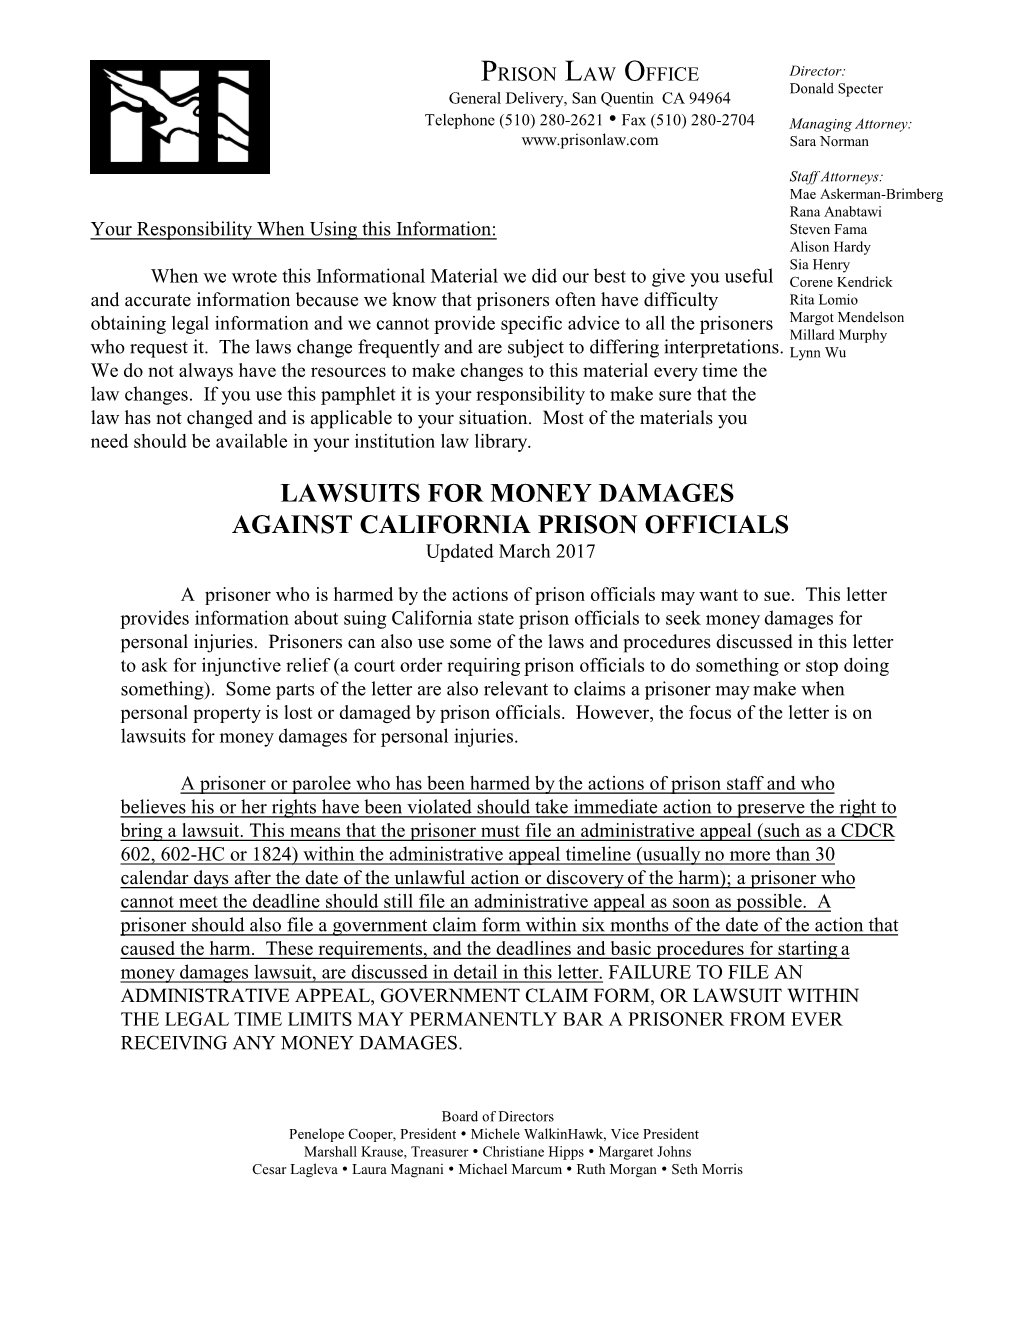 LAWSUITS for MONEY DAMAGES AGAINST CALIFORNIA PRISON OFFICIALS Updated March 2017